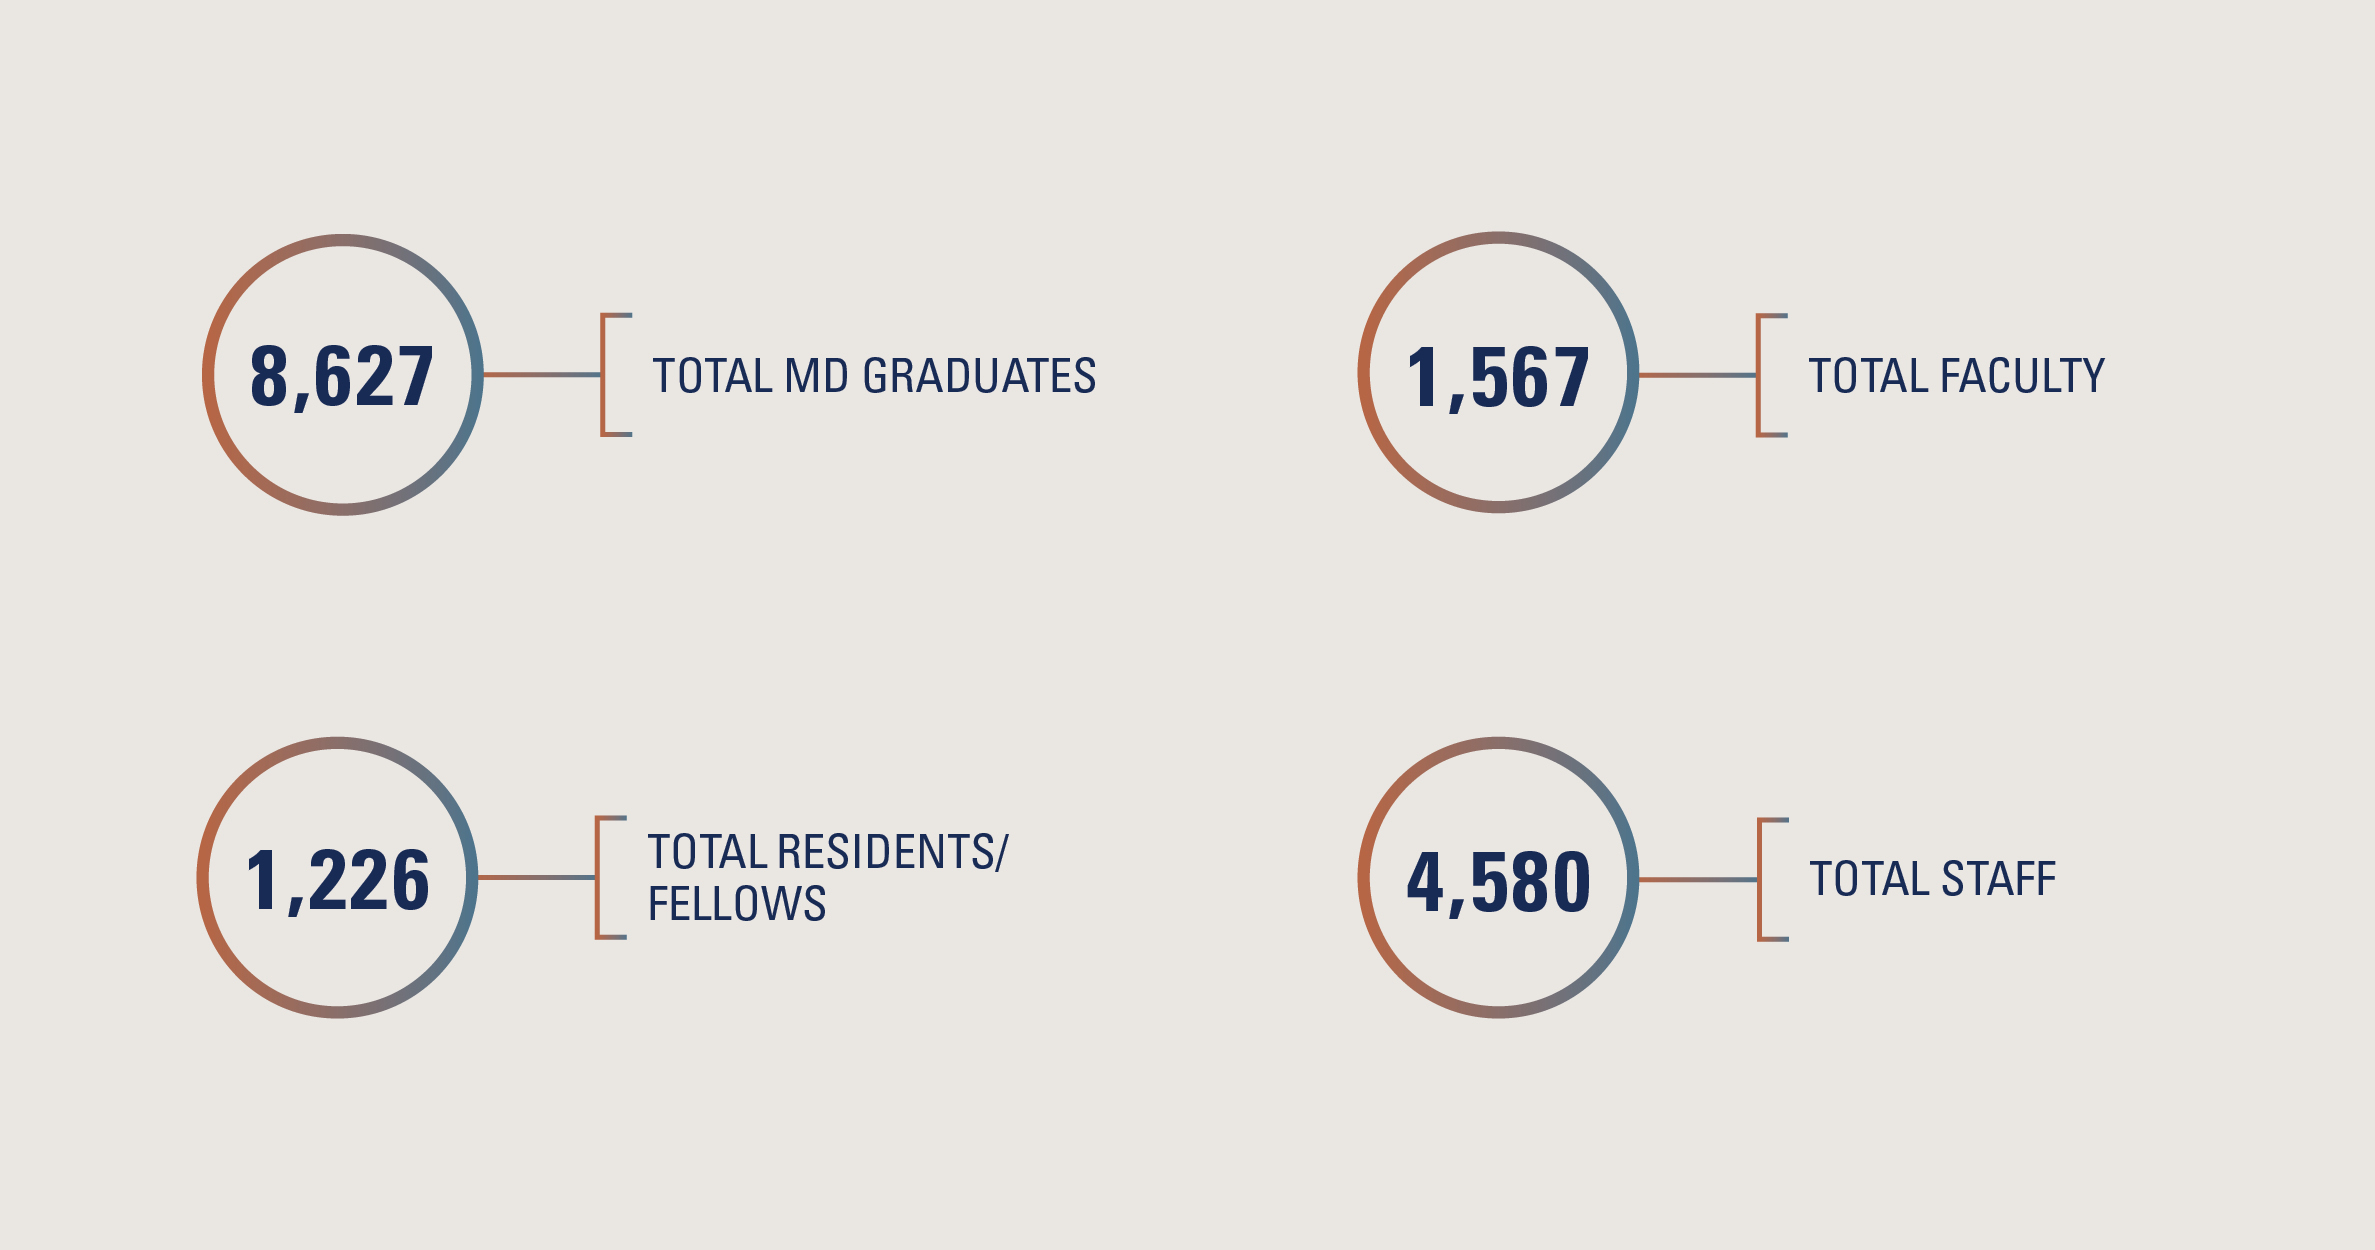 Statistics describing 8,627 total MD graduates, 1,567 total faculty, 1,226 total residents/fellows and 4,580 total staff